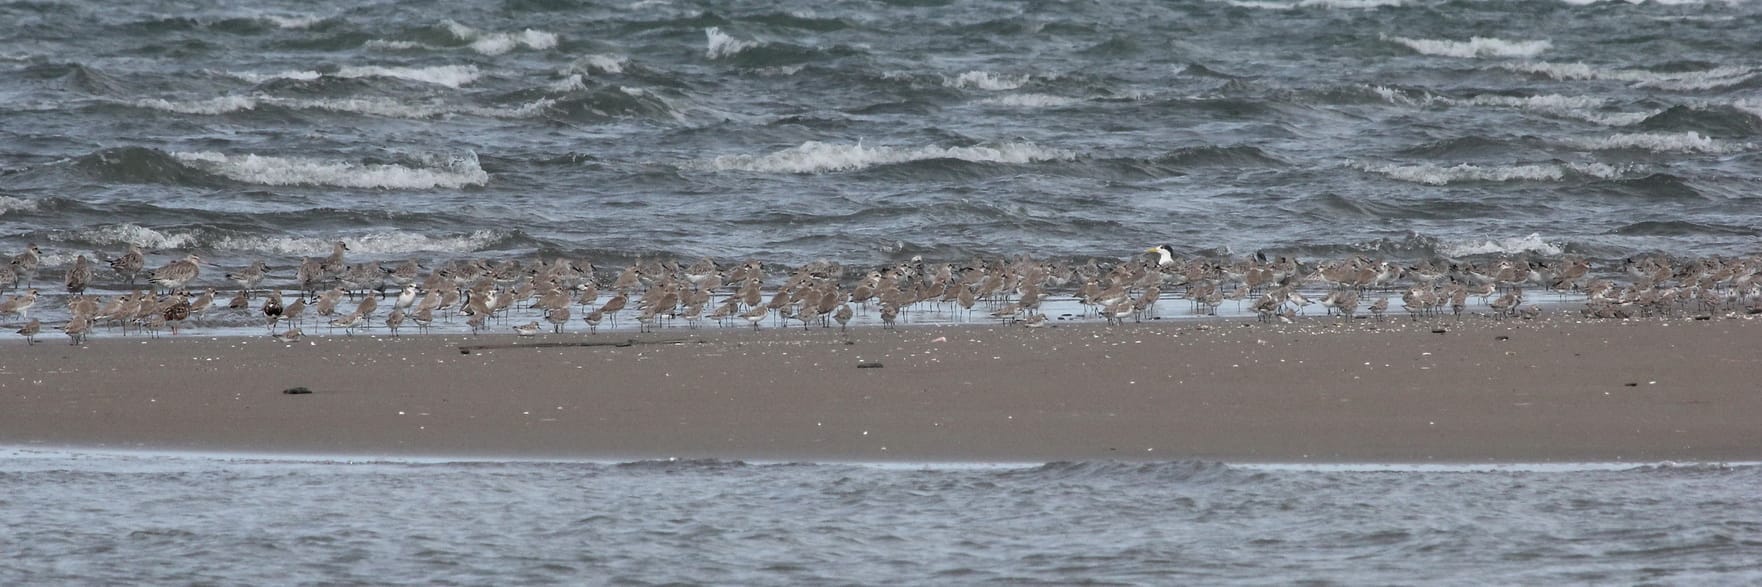 Hundreds of waders on the sandbar at high tide. Photo by Christian Perez.